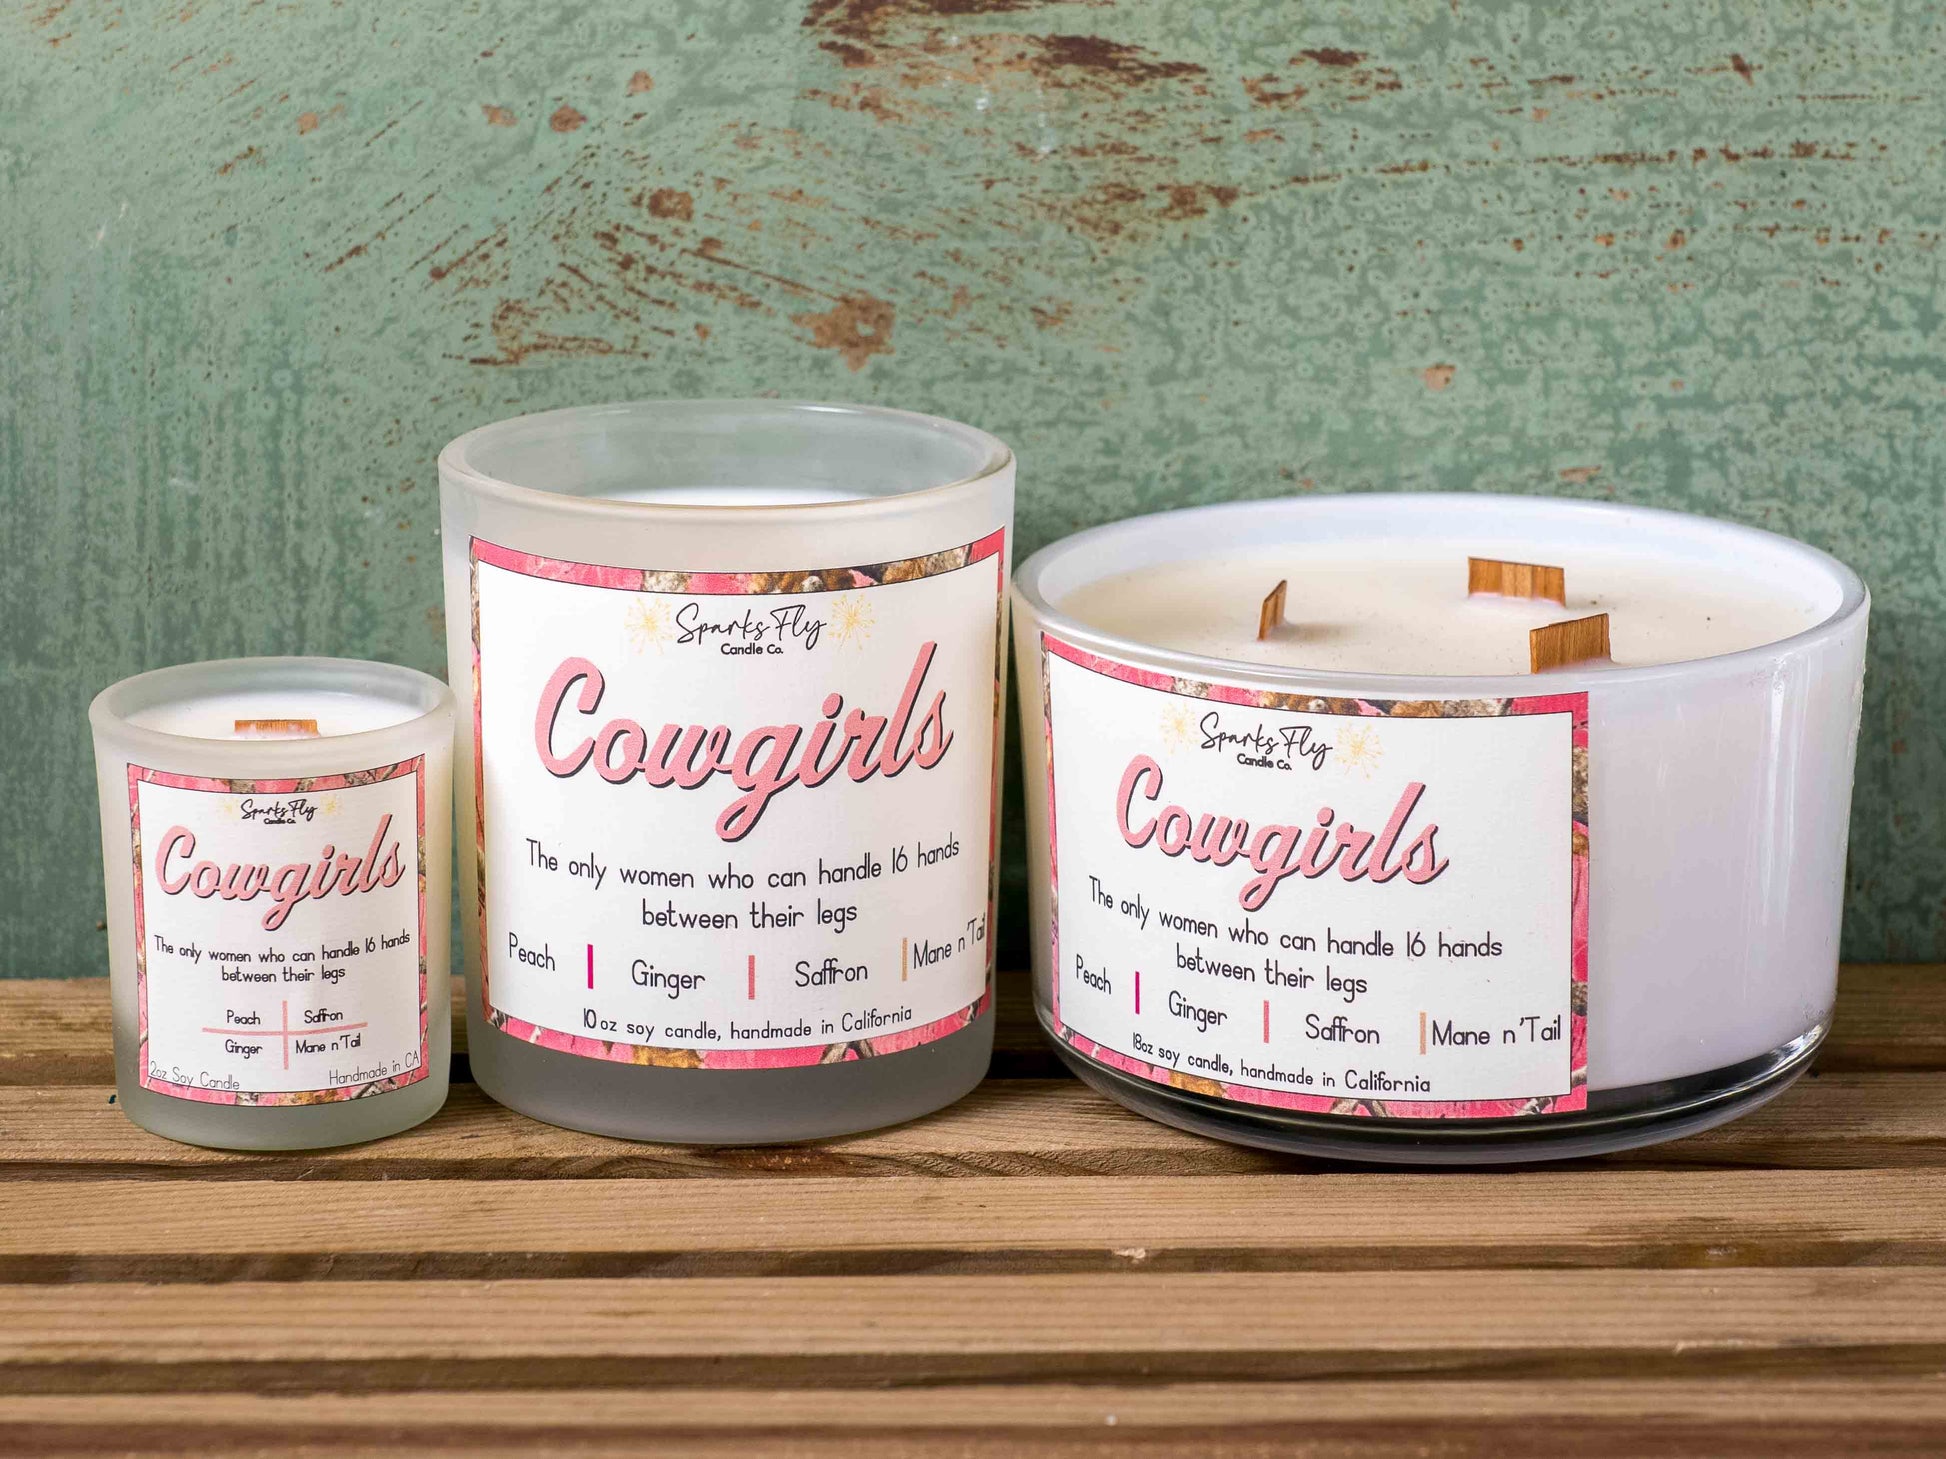 cowgirl soy candle with crackling wooden wick, essential oils the only women who can handle 16 hands between their legs